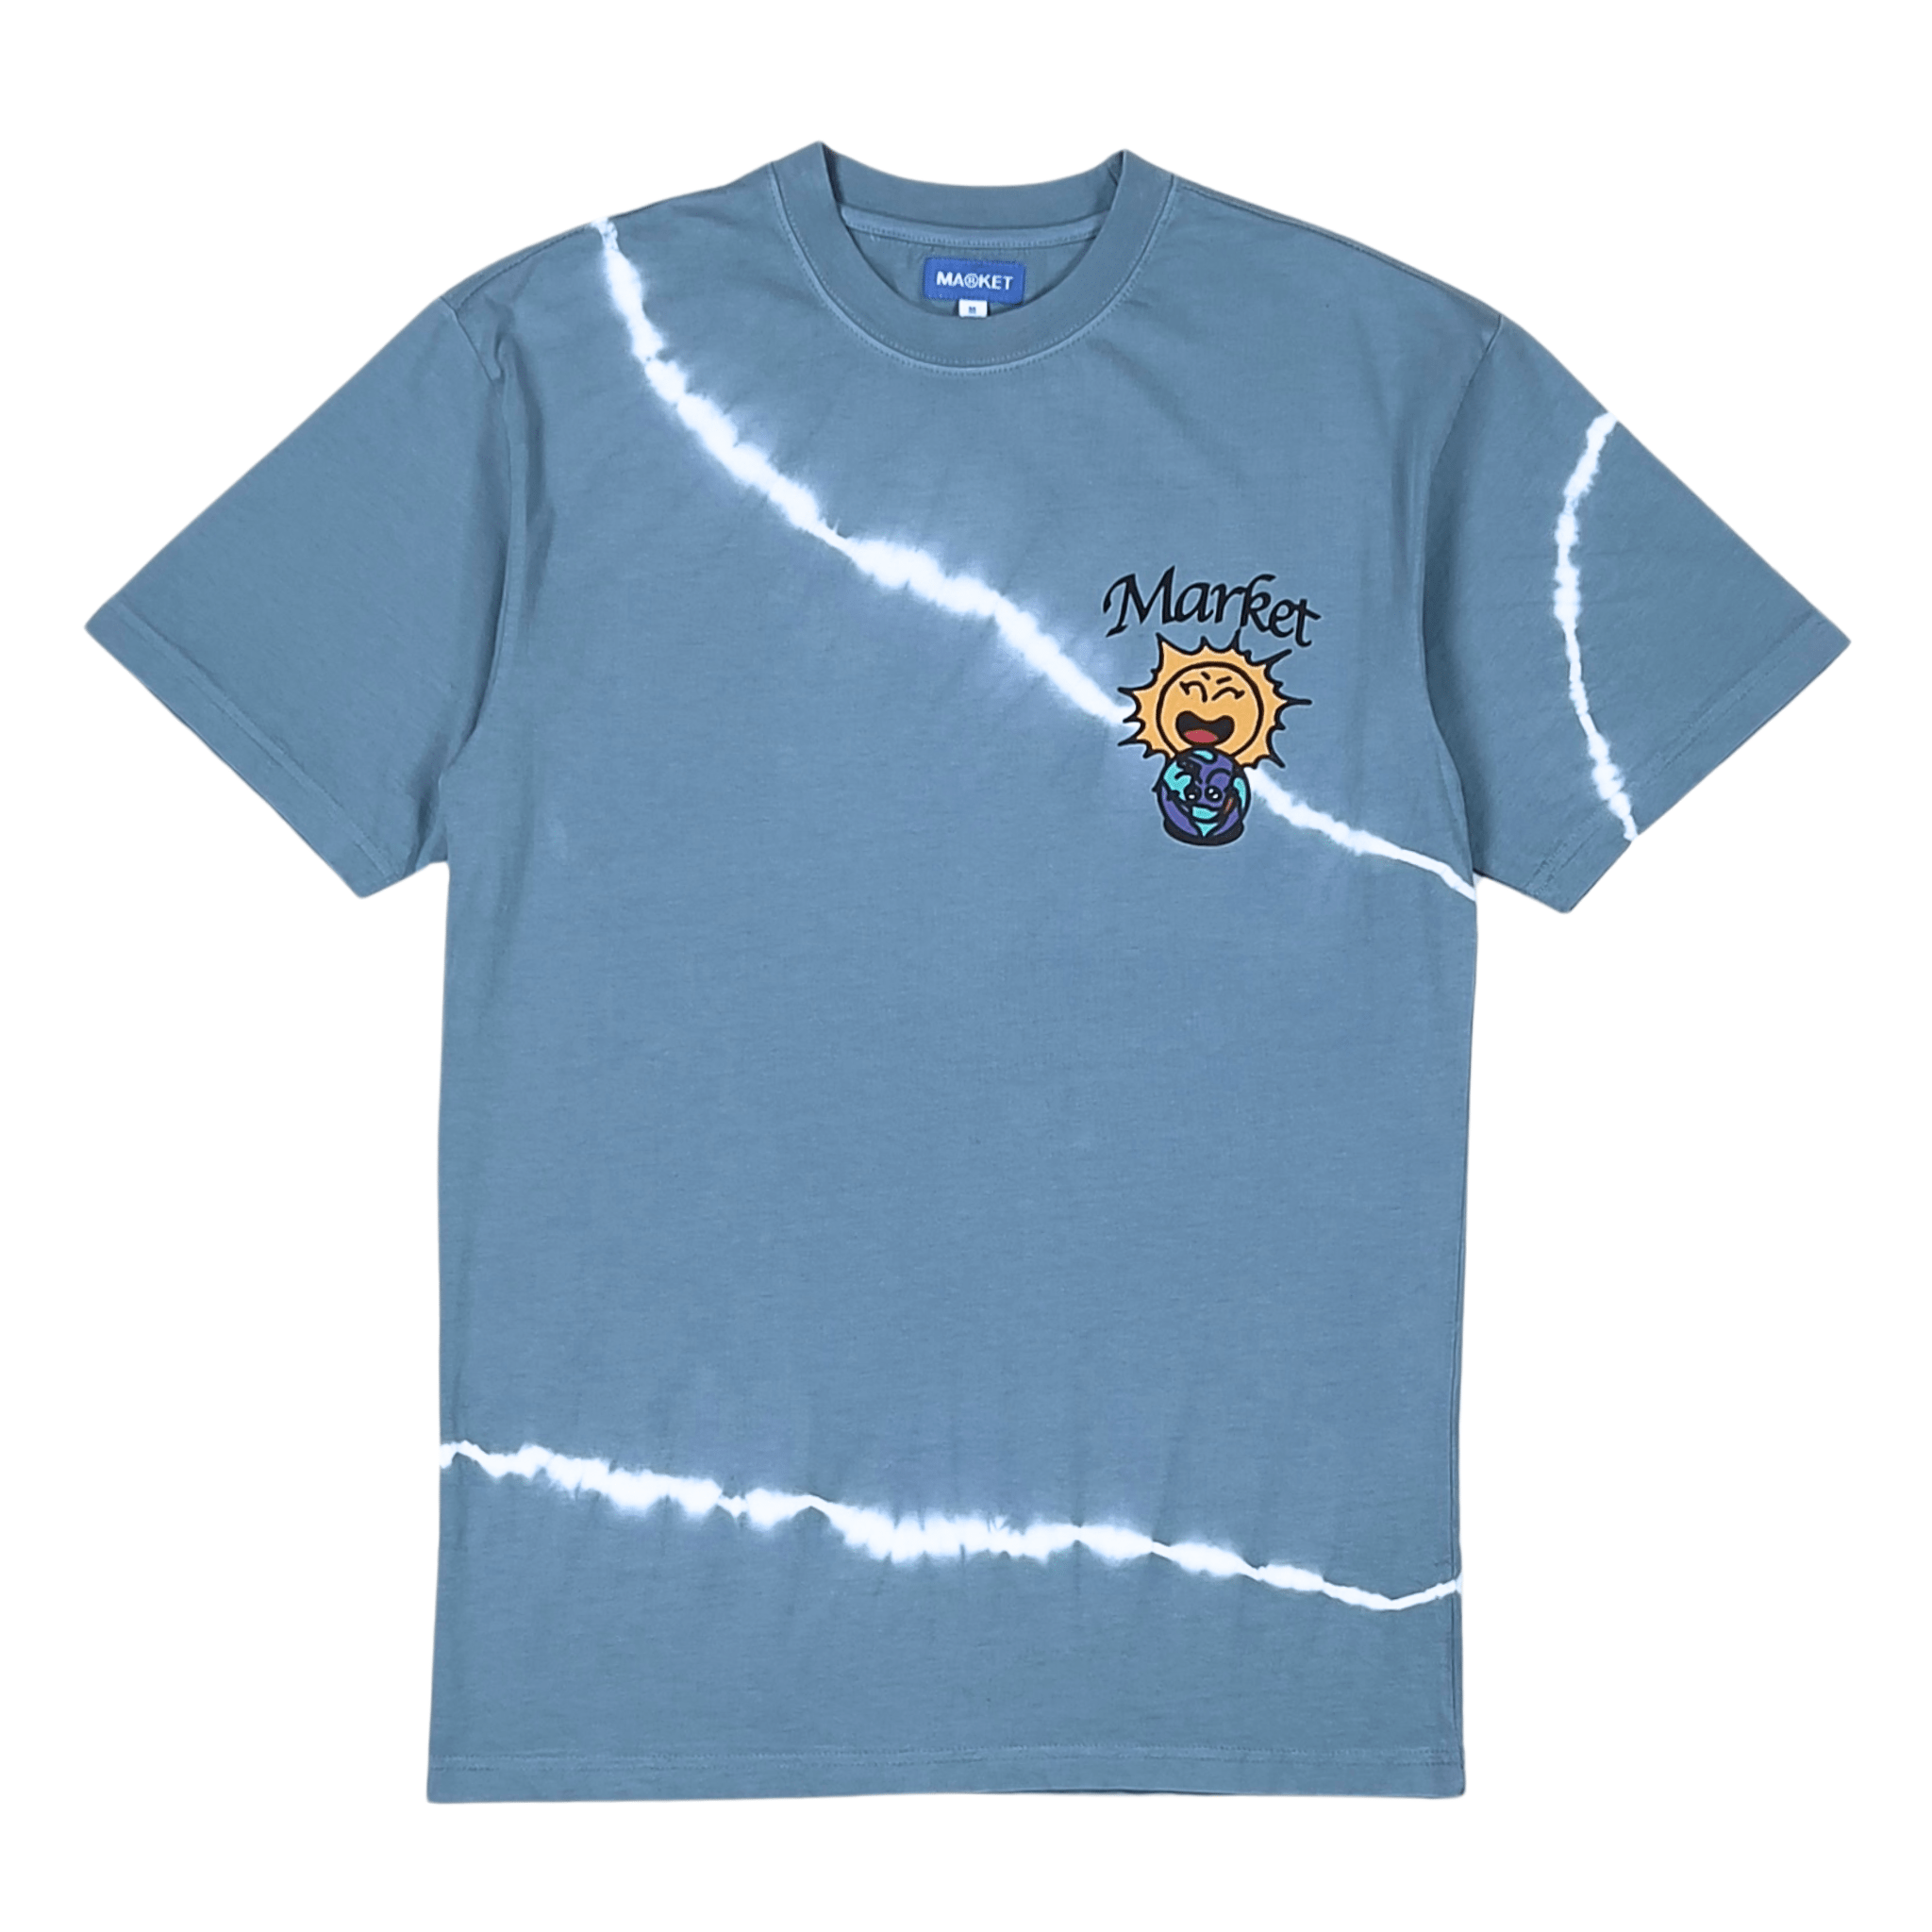 Leave No Trace Tee in indigo tie-dye - MARKET - State Of Flux